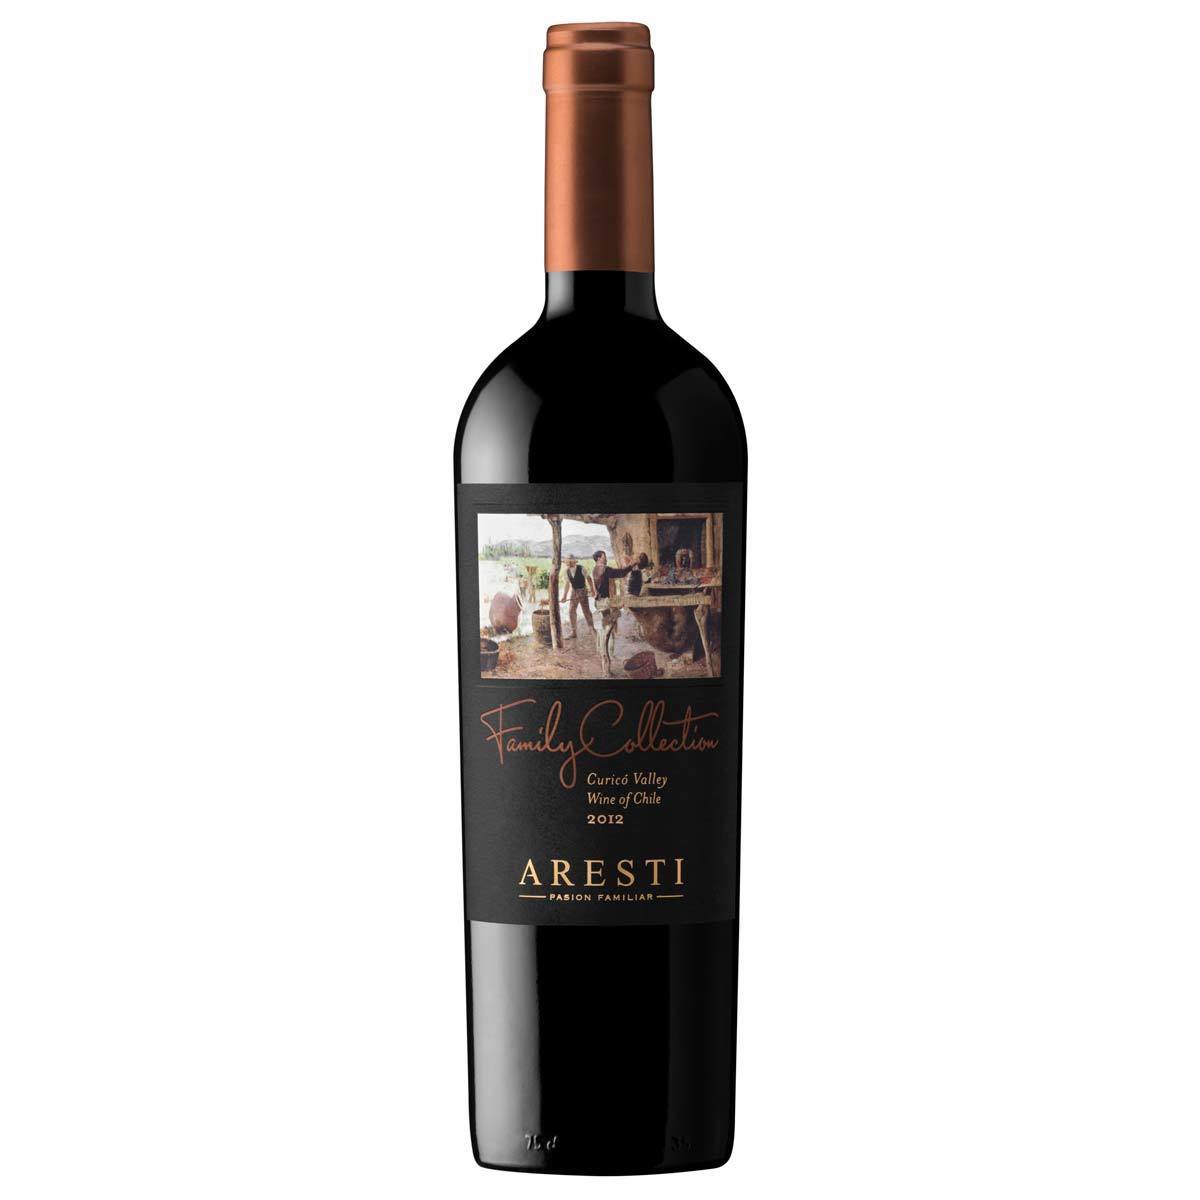 Aresti Family Collection Assemblage 2012, 6 x 75cl